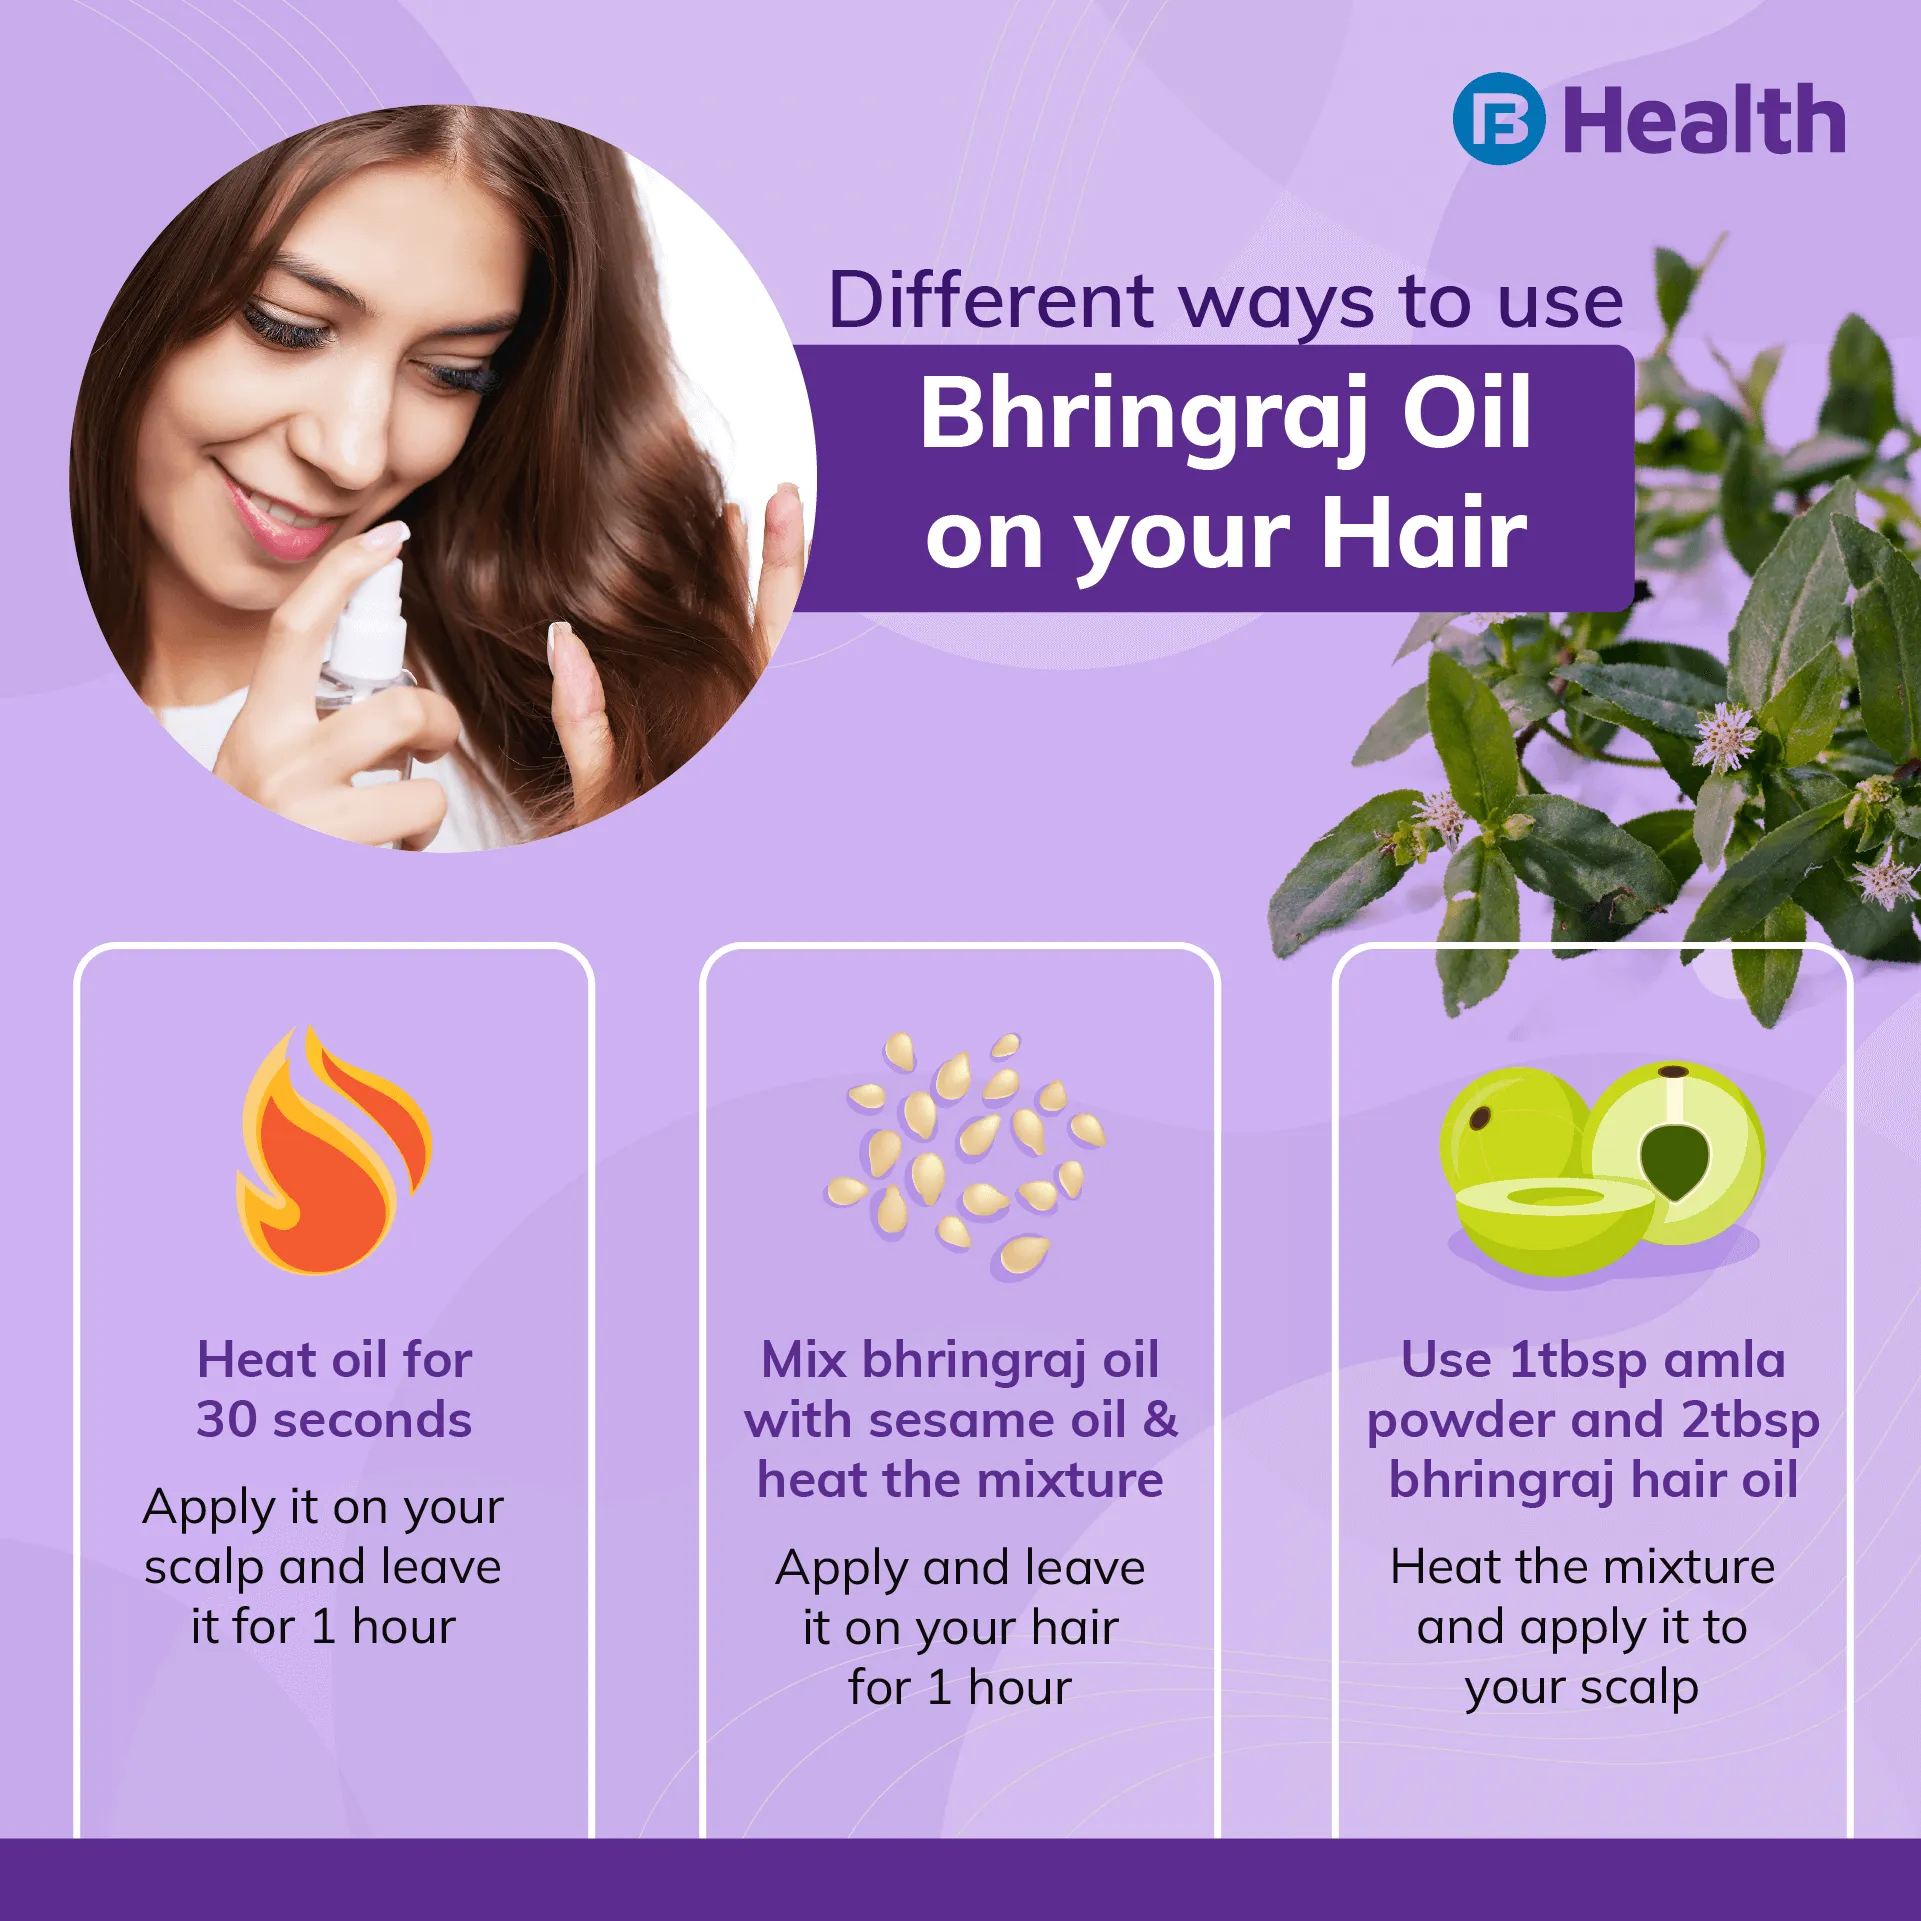 Bhringraj : Benefits, Uses, Side Effects, and Precautions